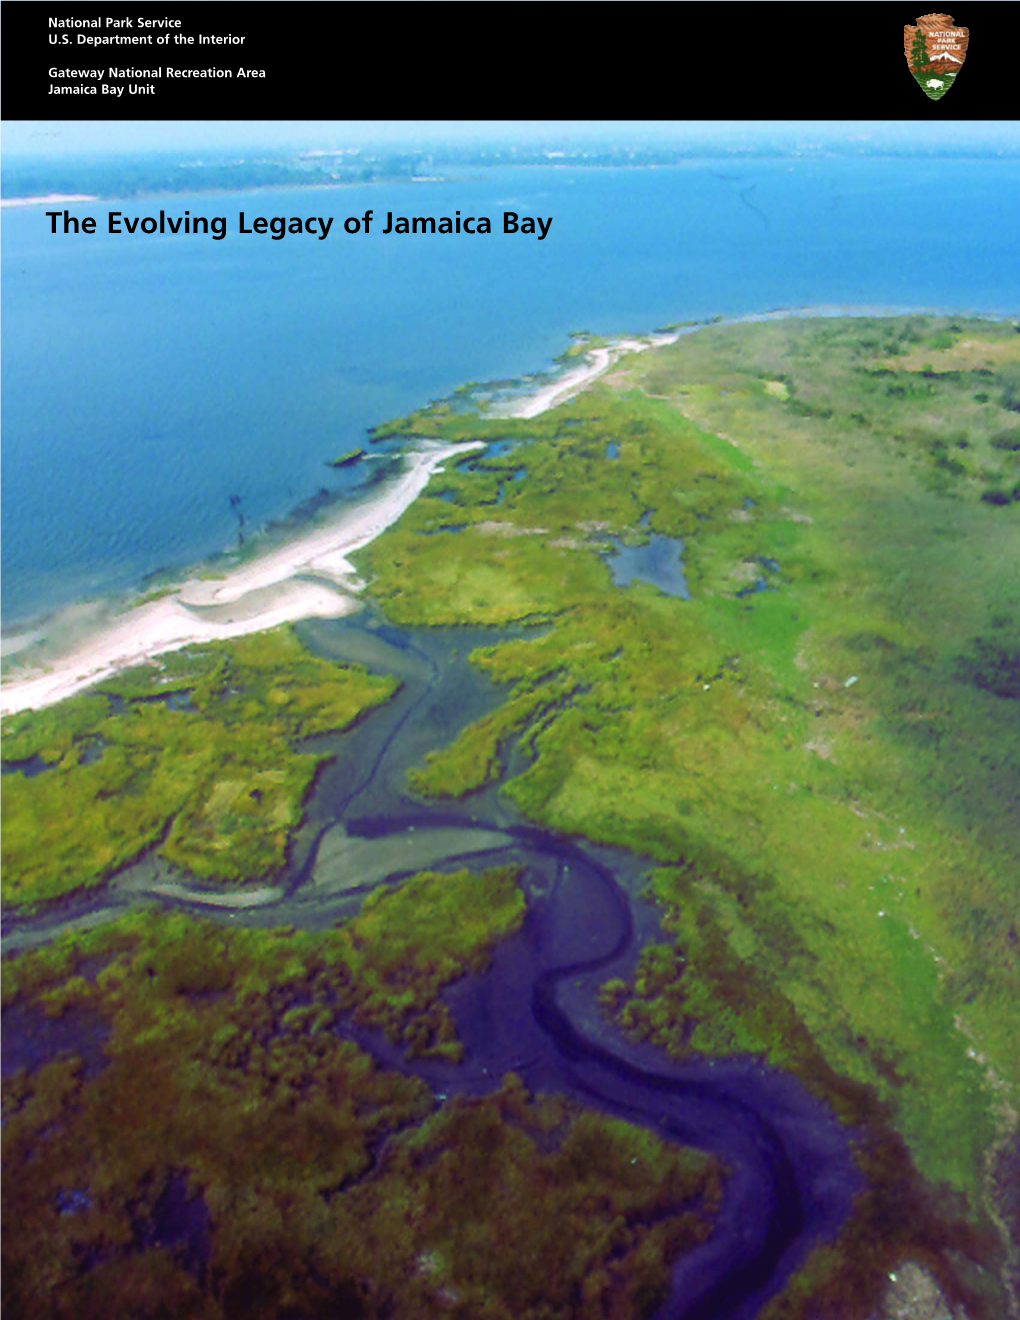 The Evolving Legacy of Jamaica Bay